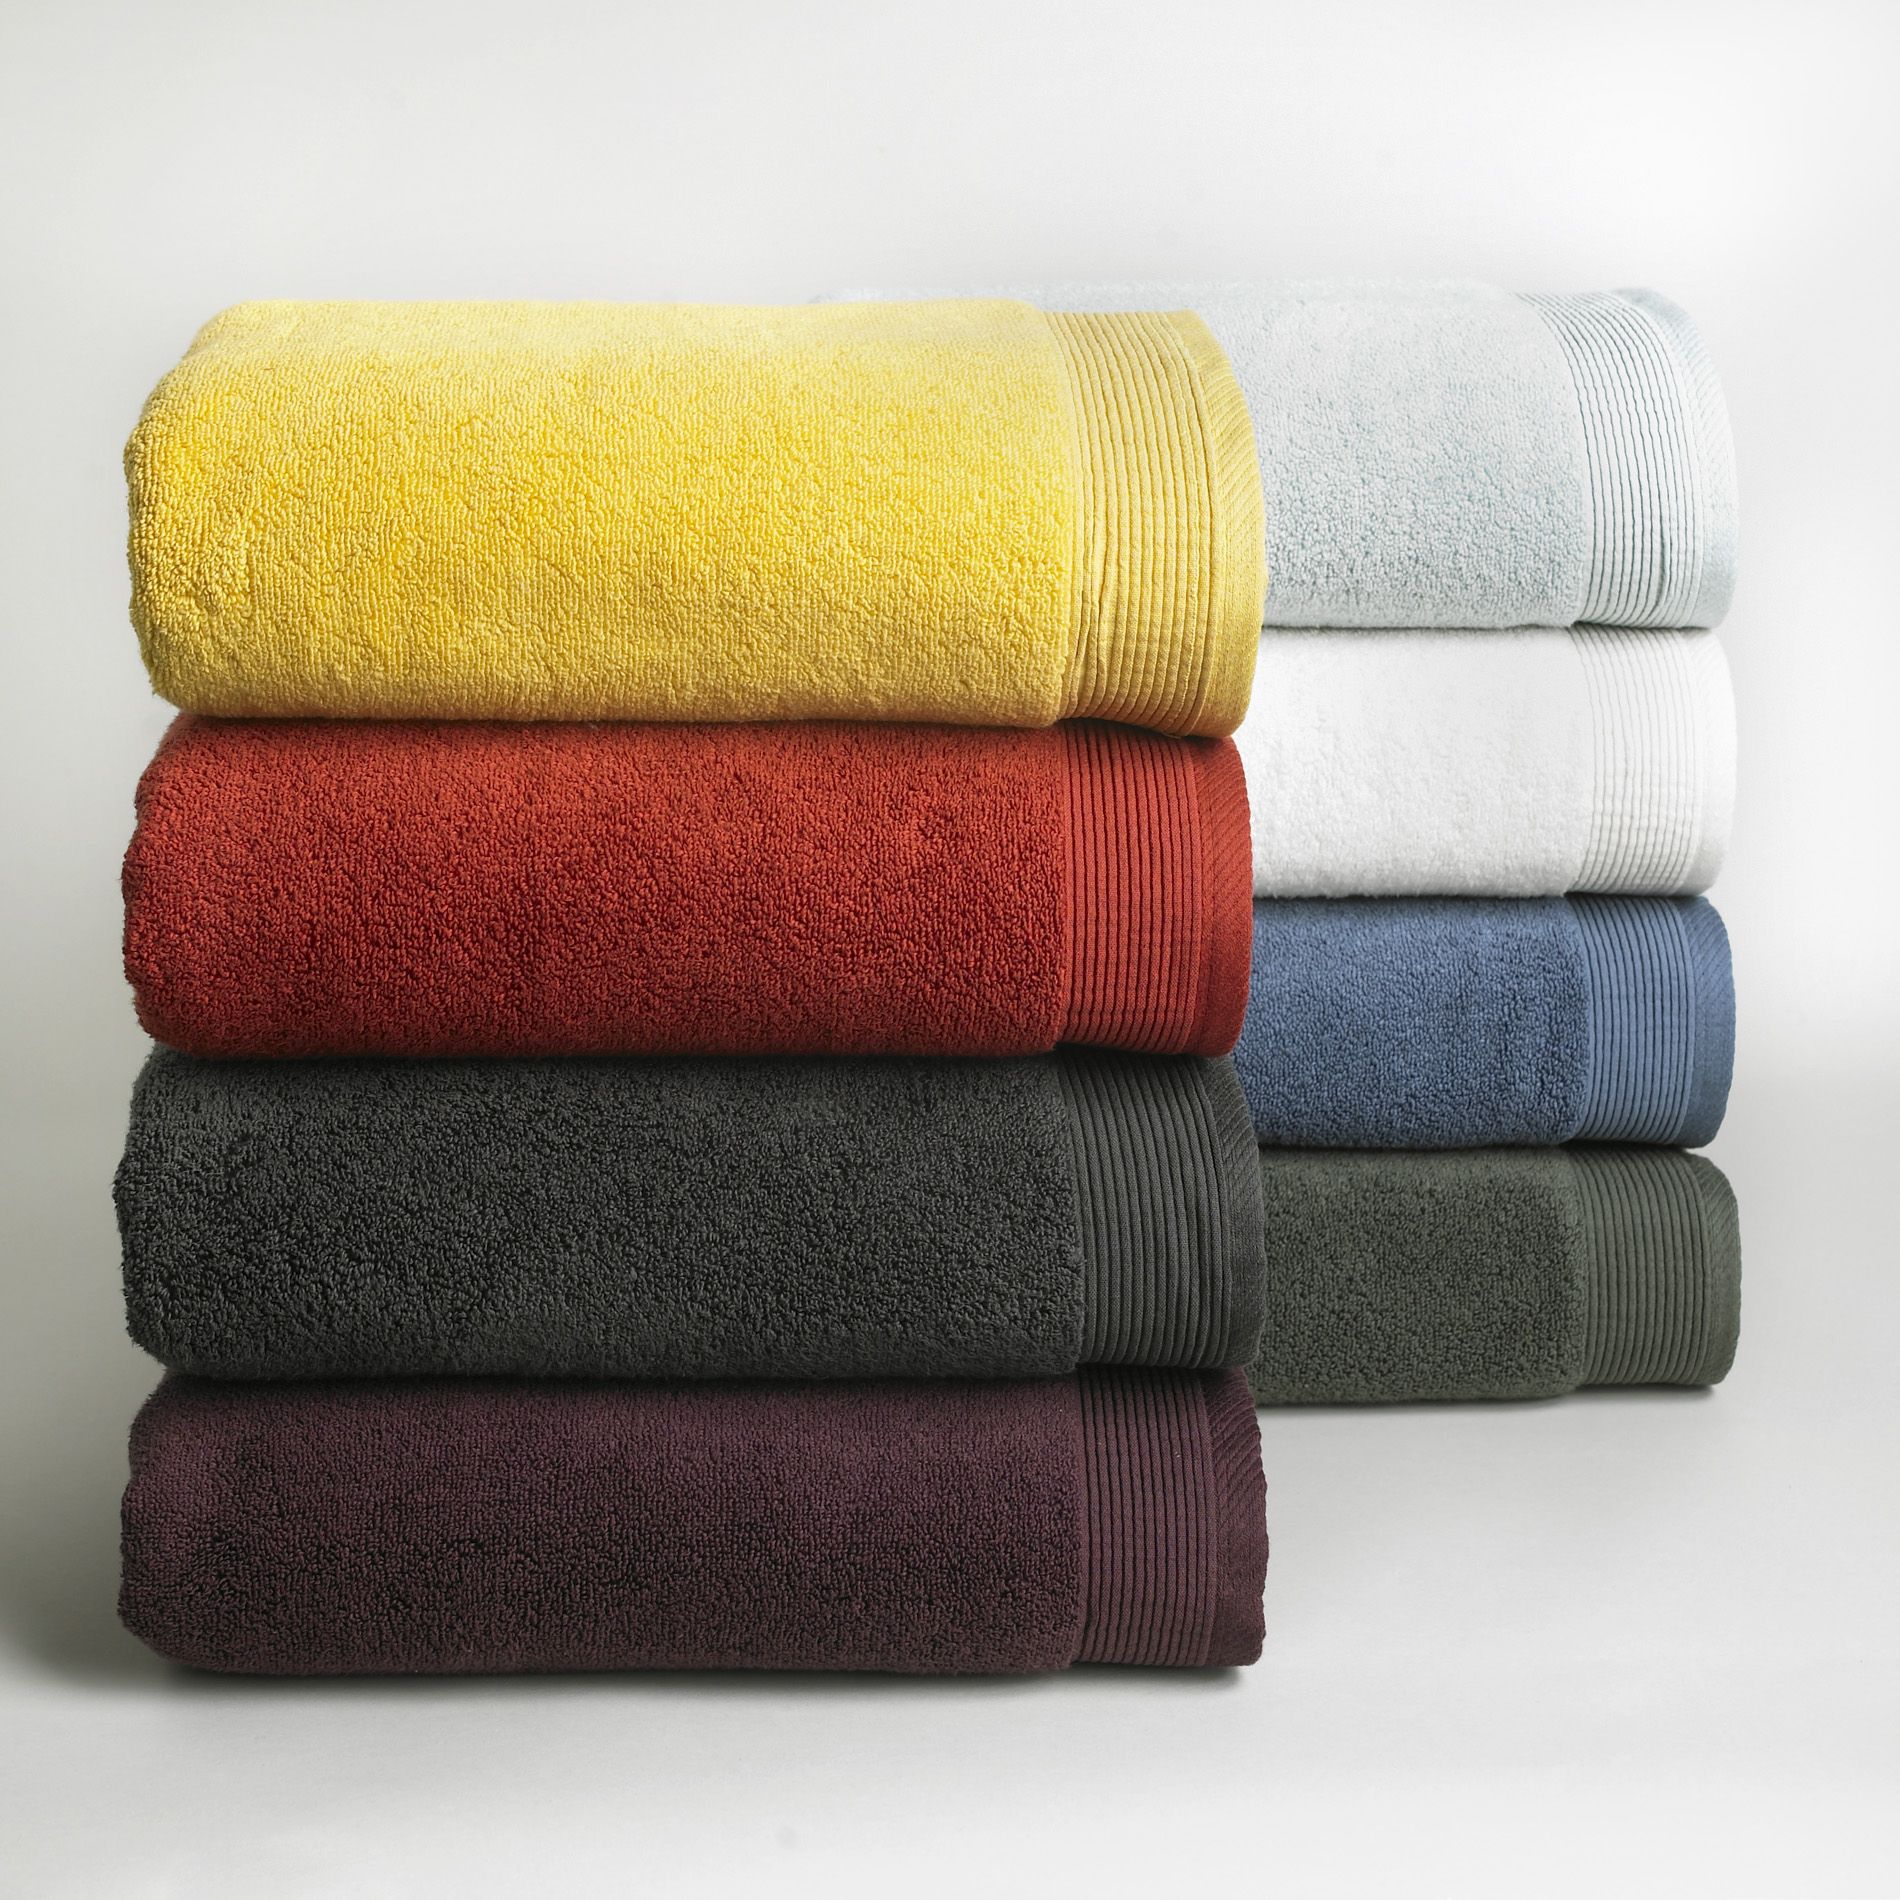 Country Living Egyptian Cotton Tub Mat